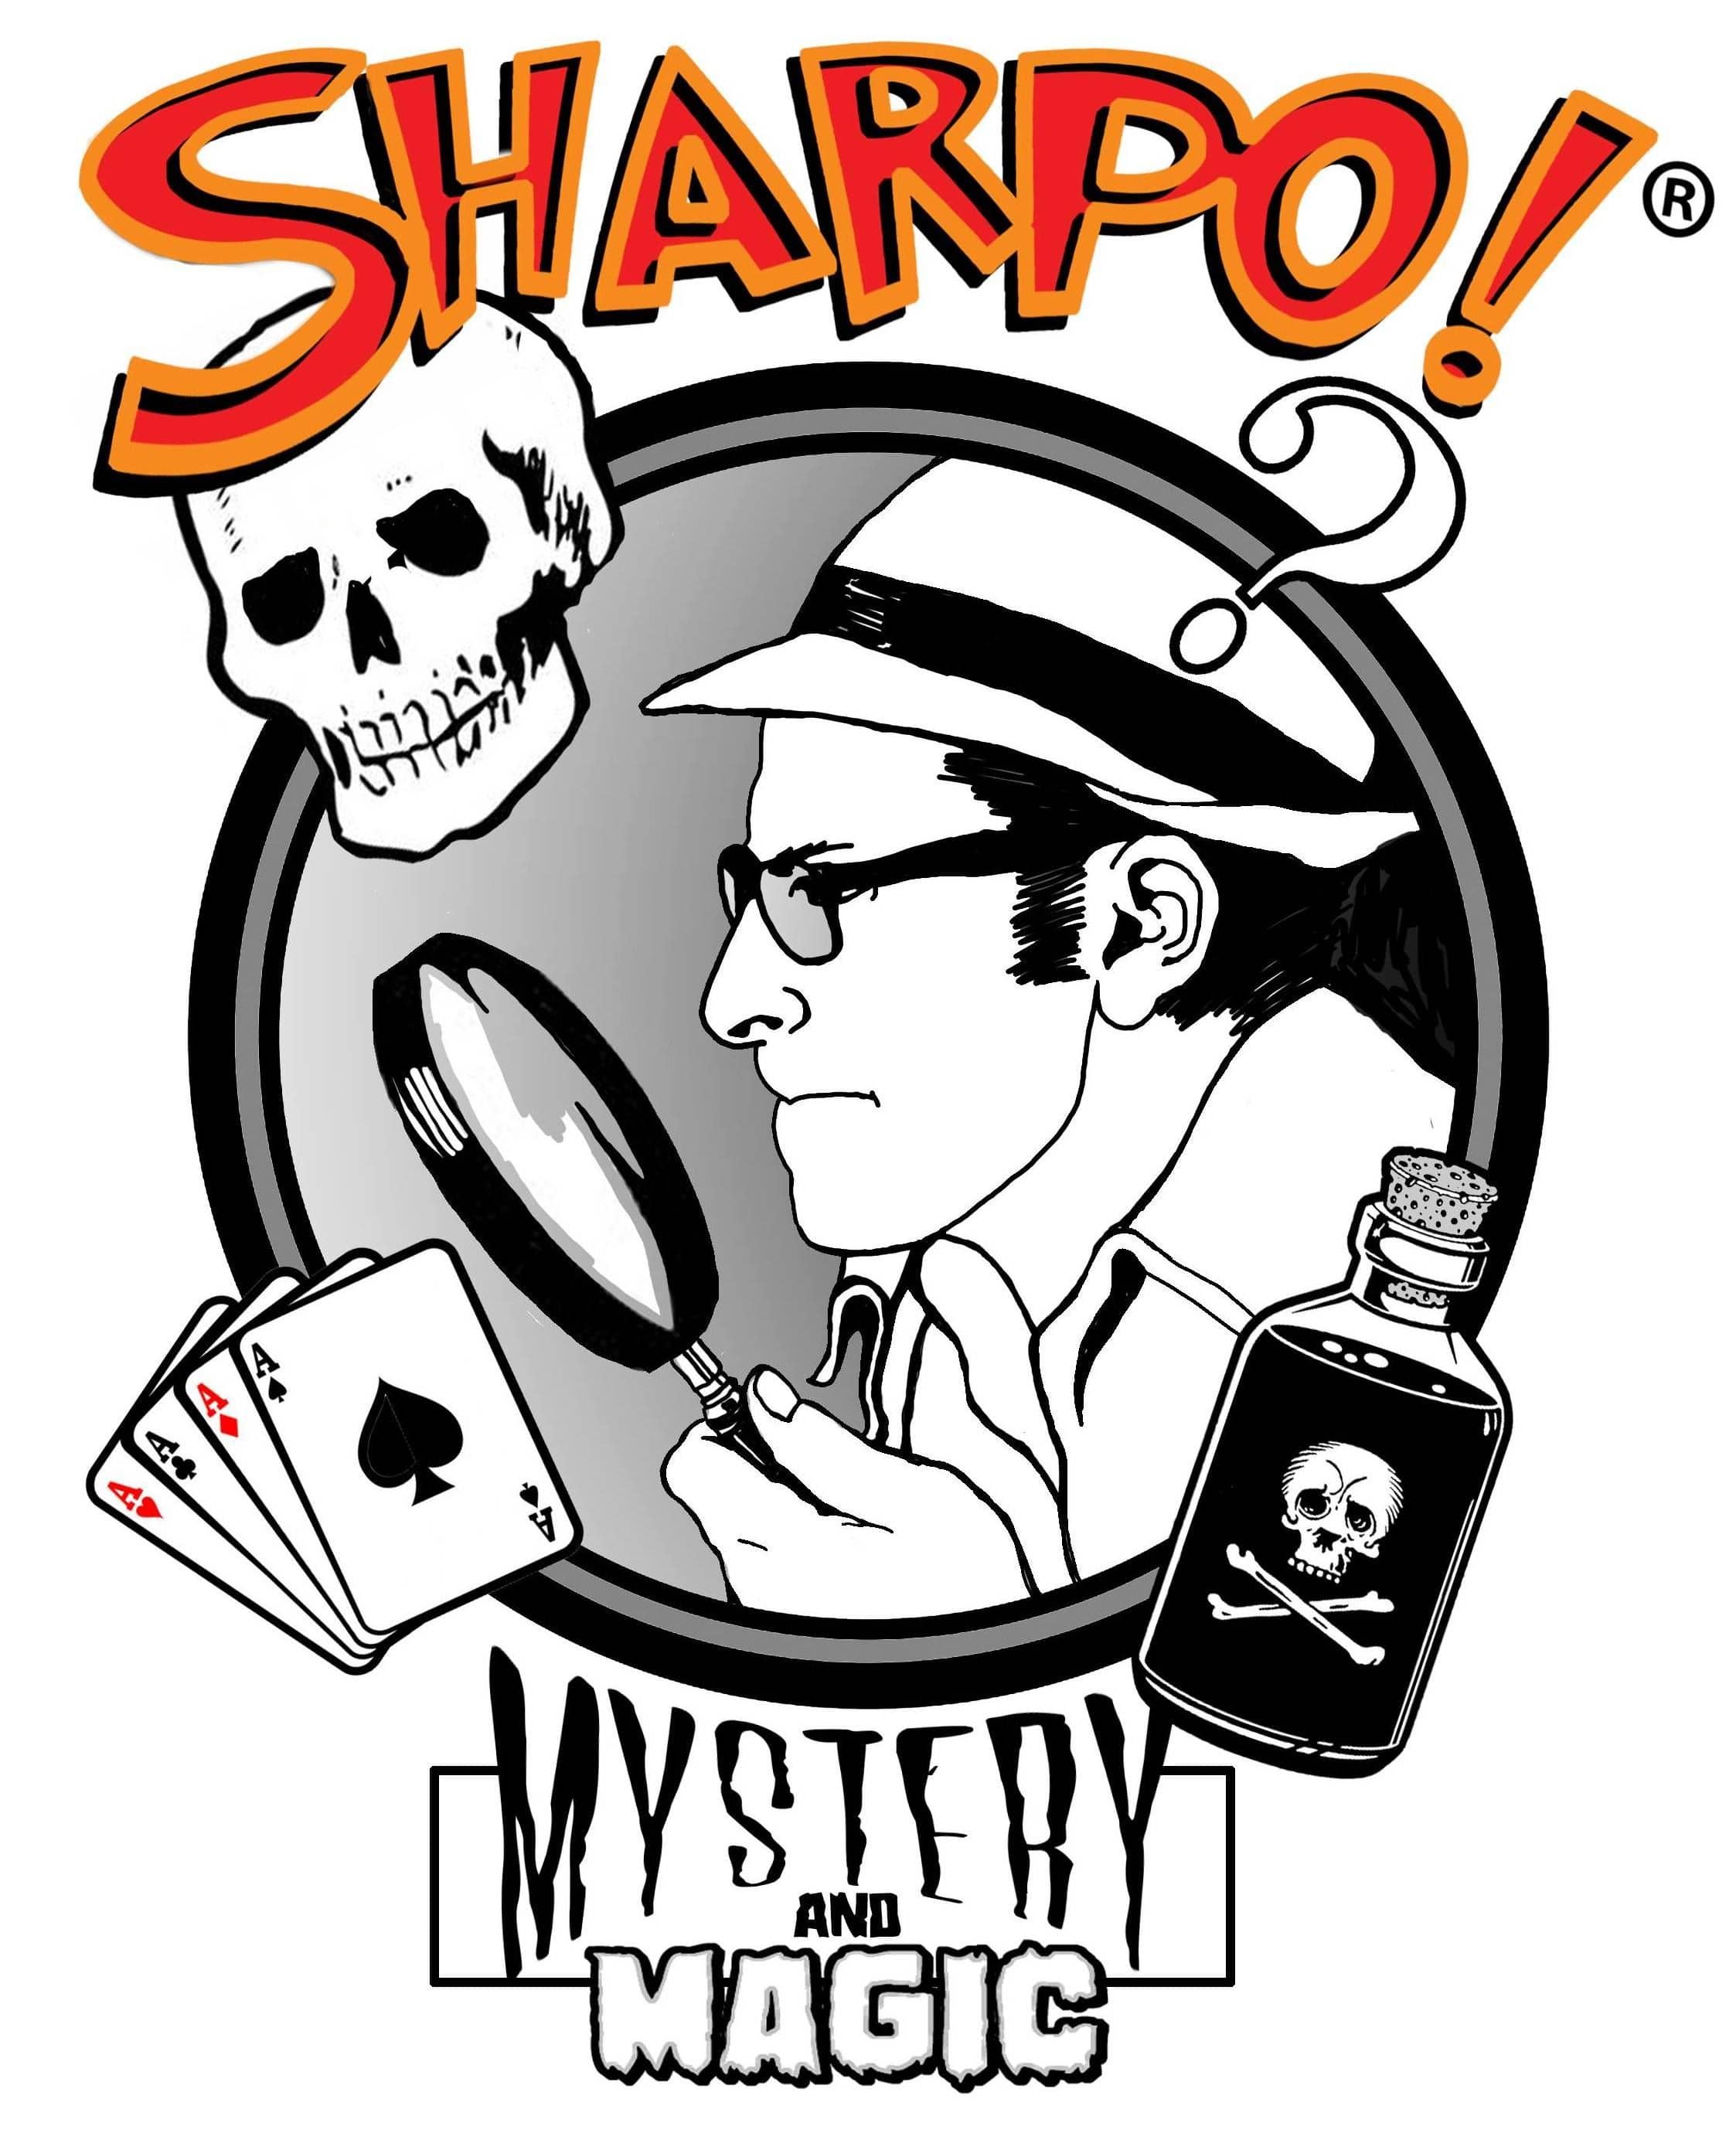 Sharpo is famous for mystery theater and magic shows.  